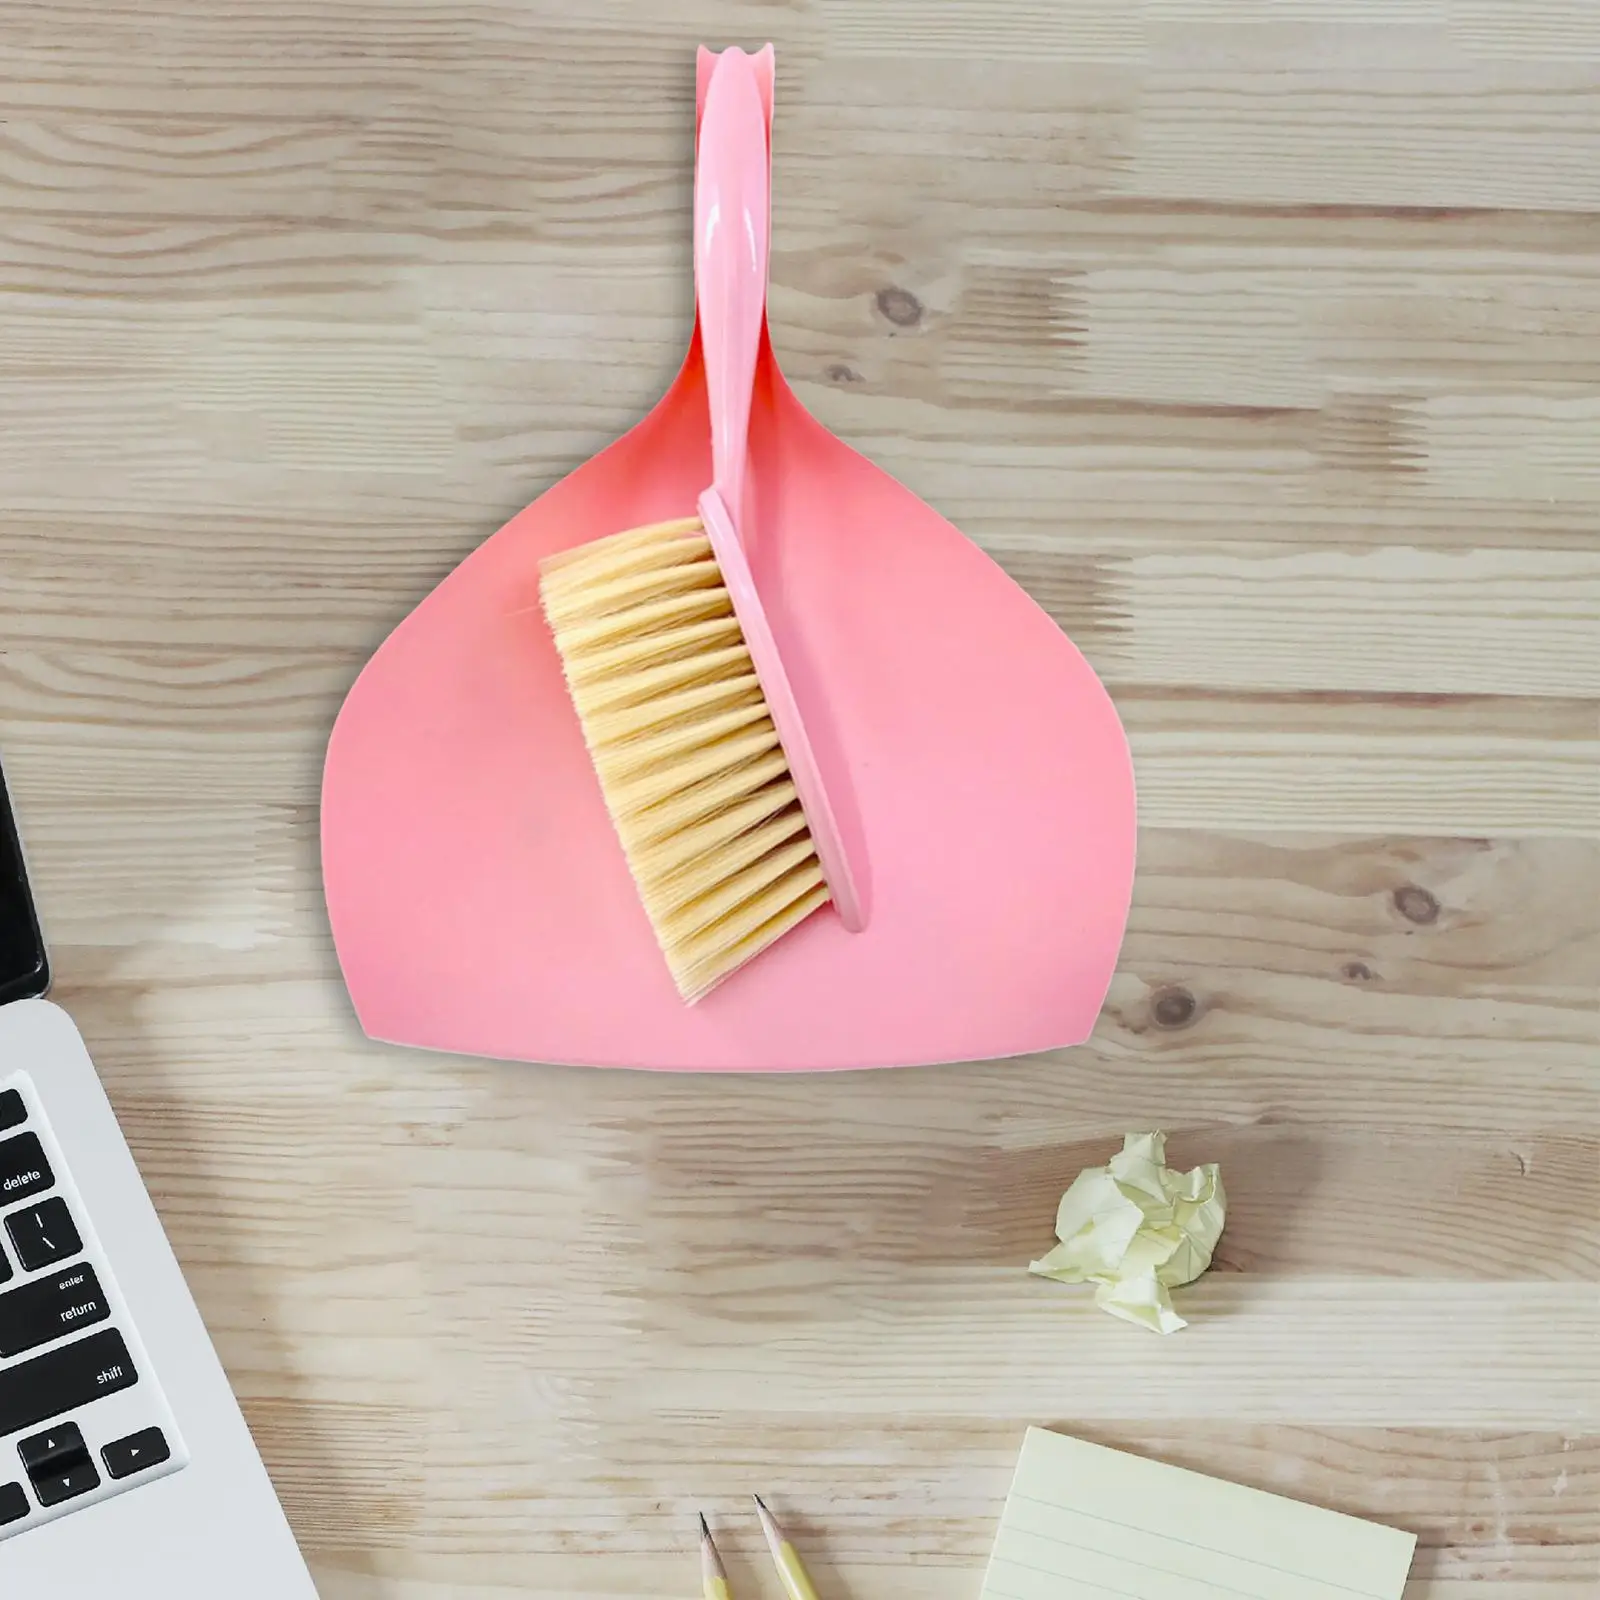 Mini Cleaning Broom Brush Set Durable Small Reuse Portable Dustpan and Stiff Brush Set for Desktop Keyboard Counter Table Office